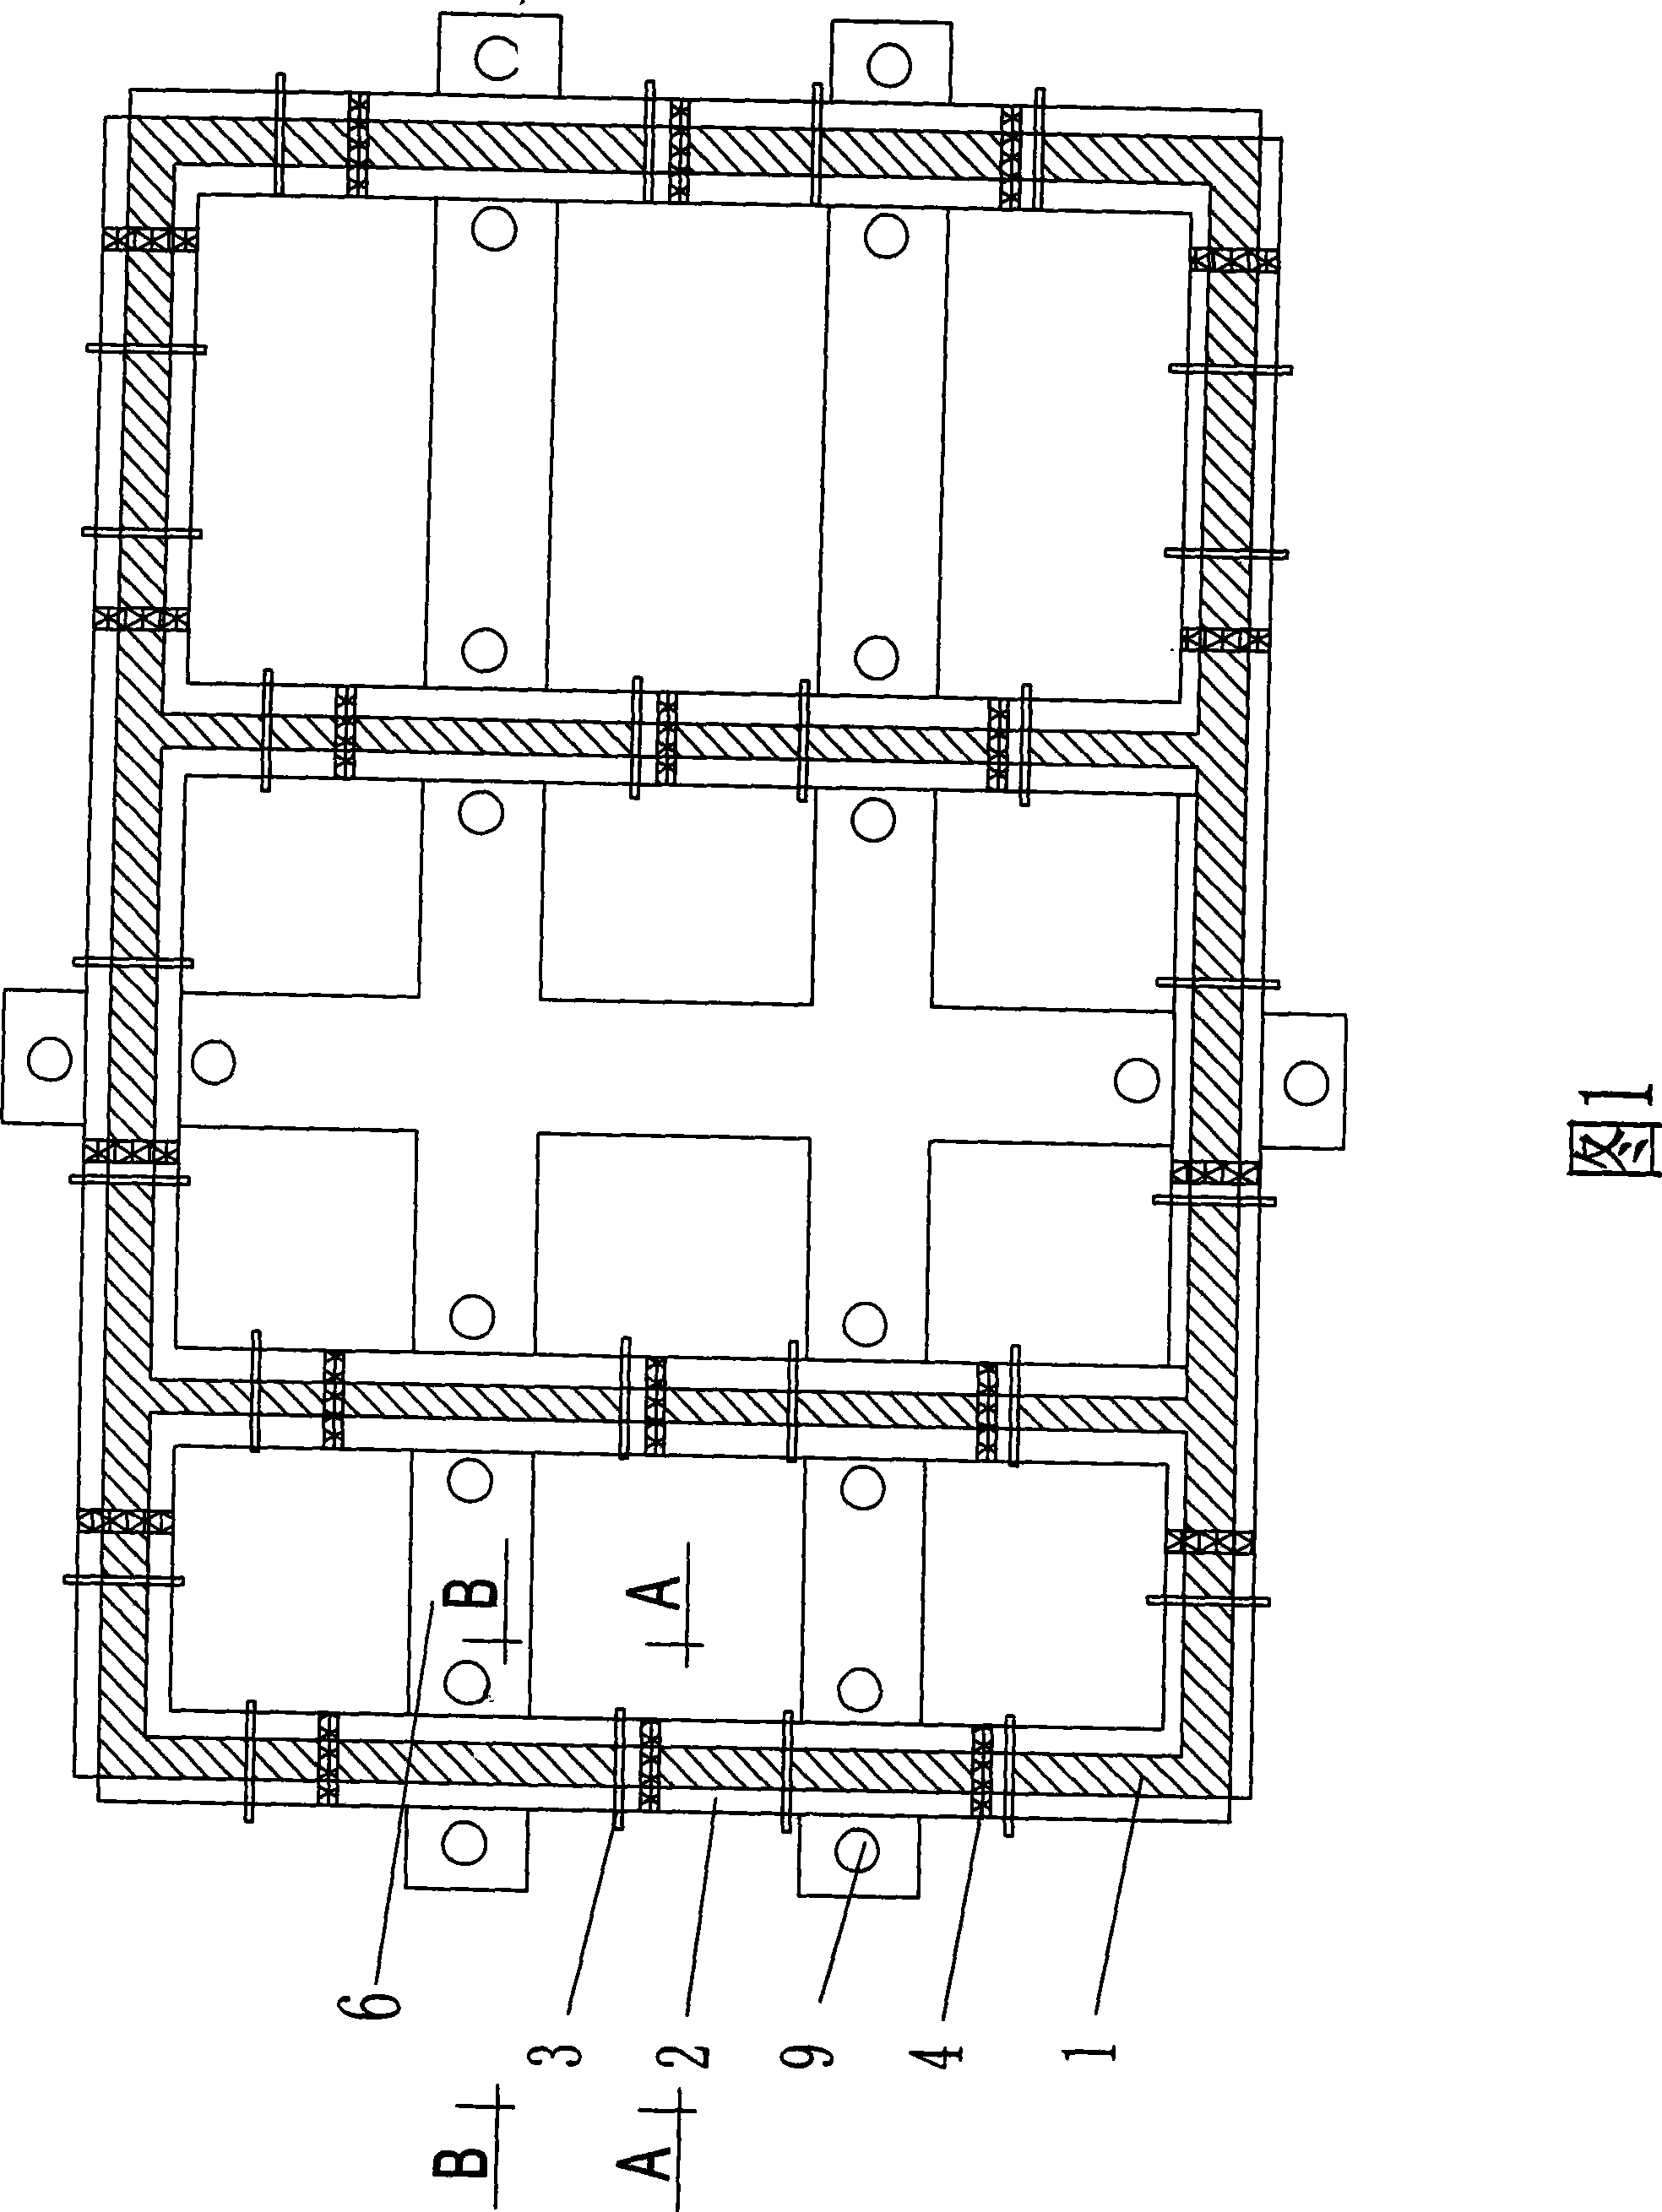 Construction method for increasing to build multi-storey basement to original building